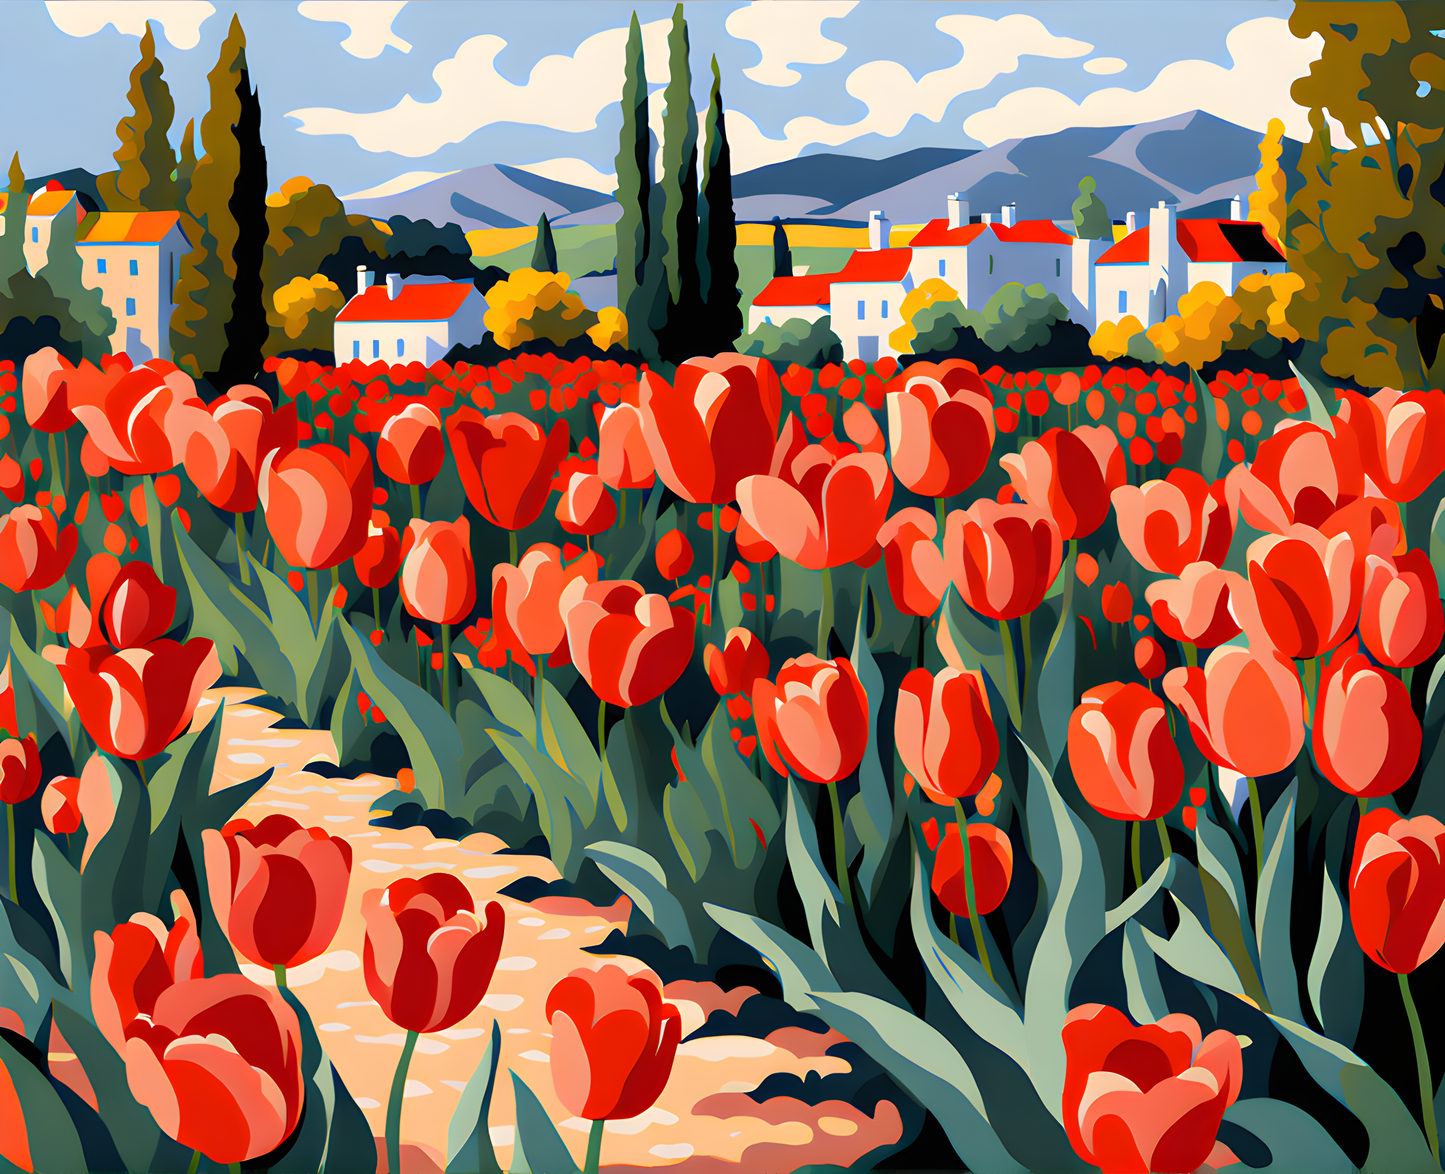 Red Tulips Field (1) - Van-Go Paint-By-Number Kit